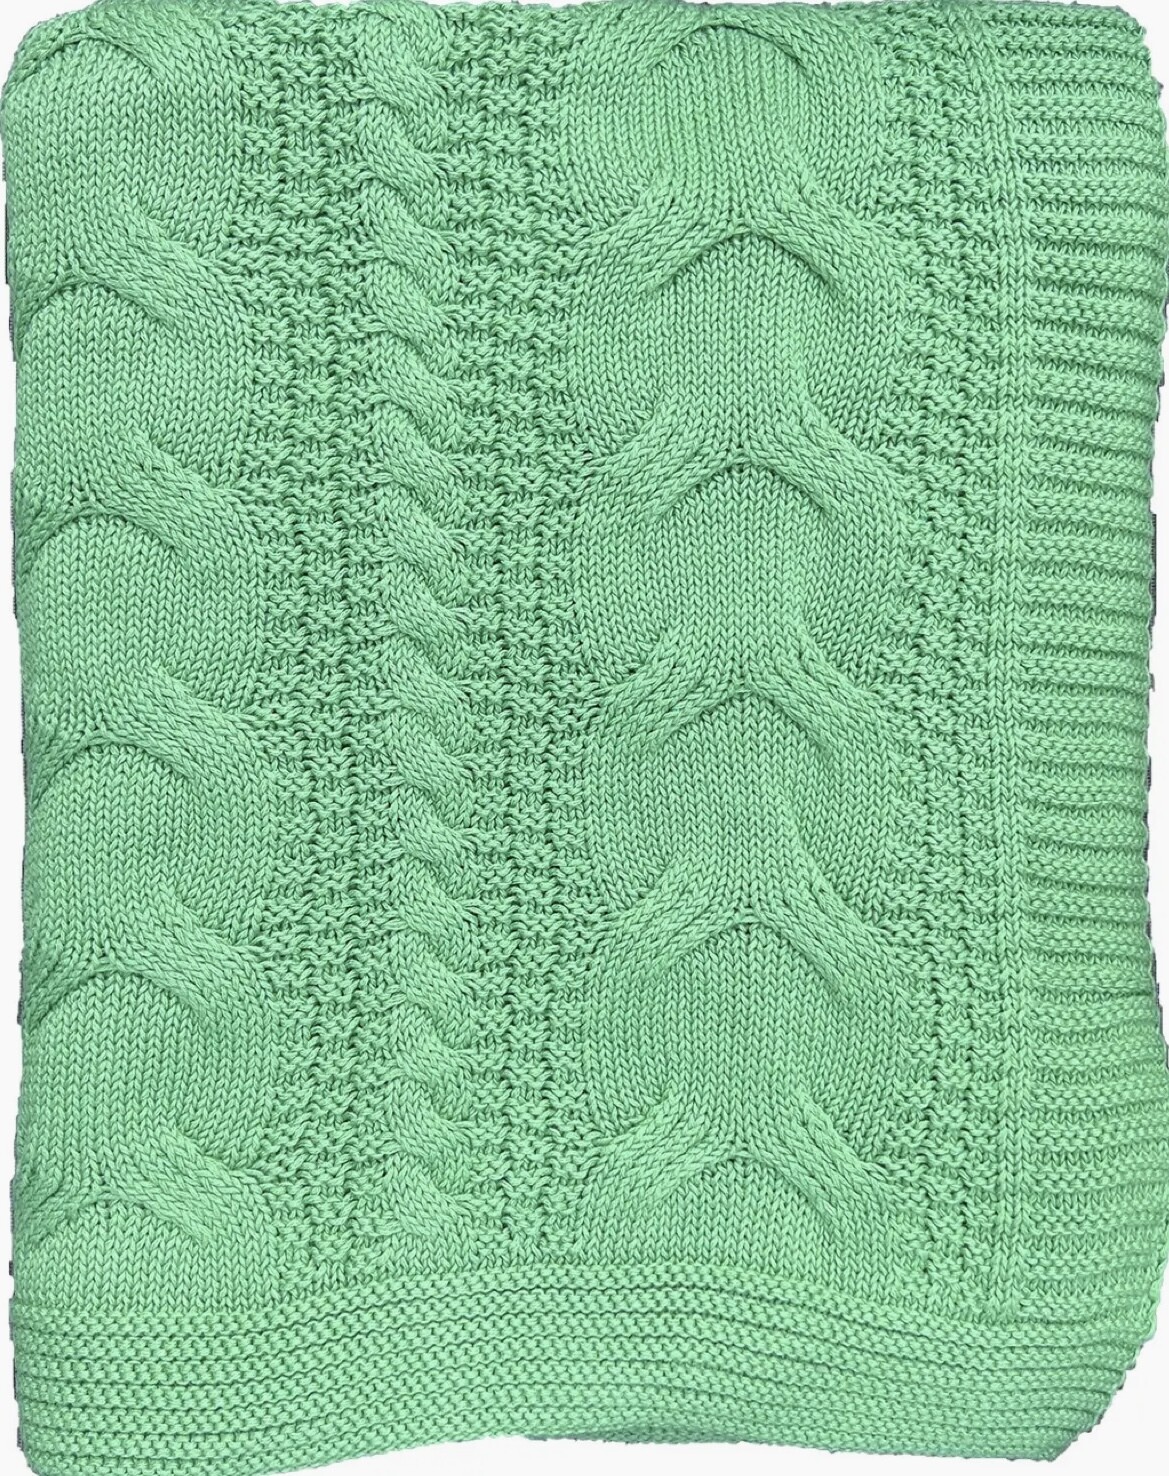 Classic Cable Knit Throw Bright Green